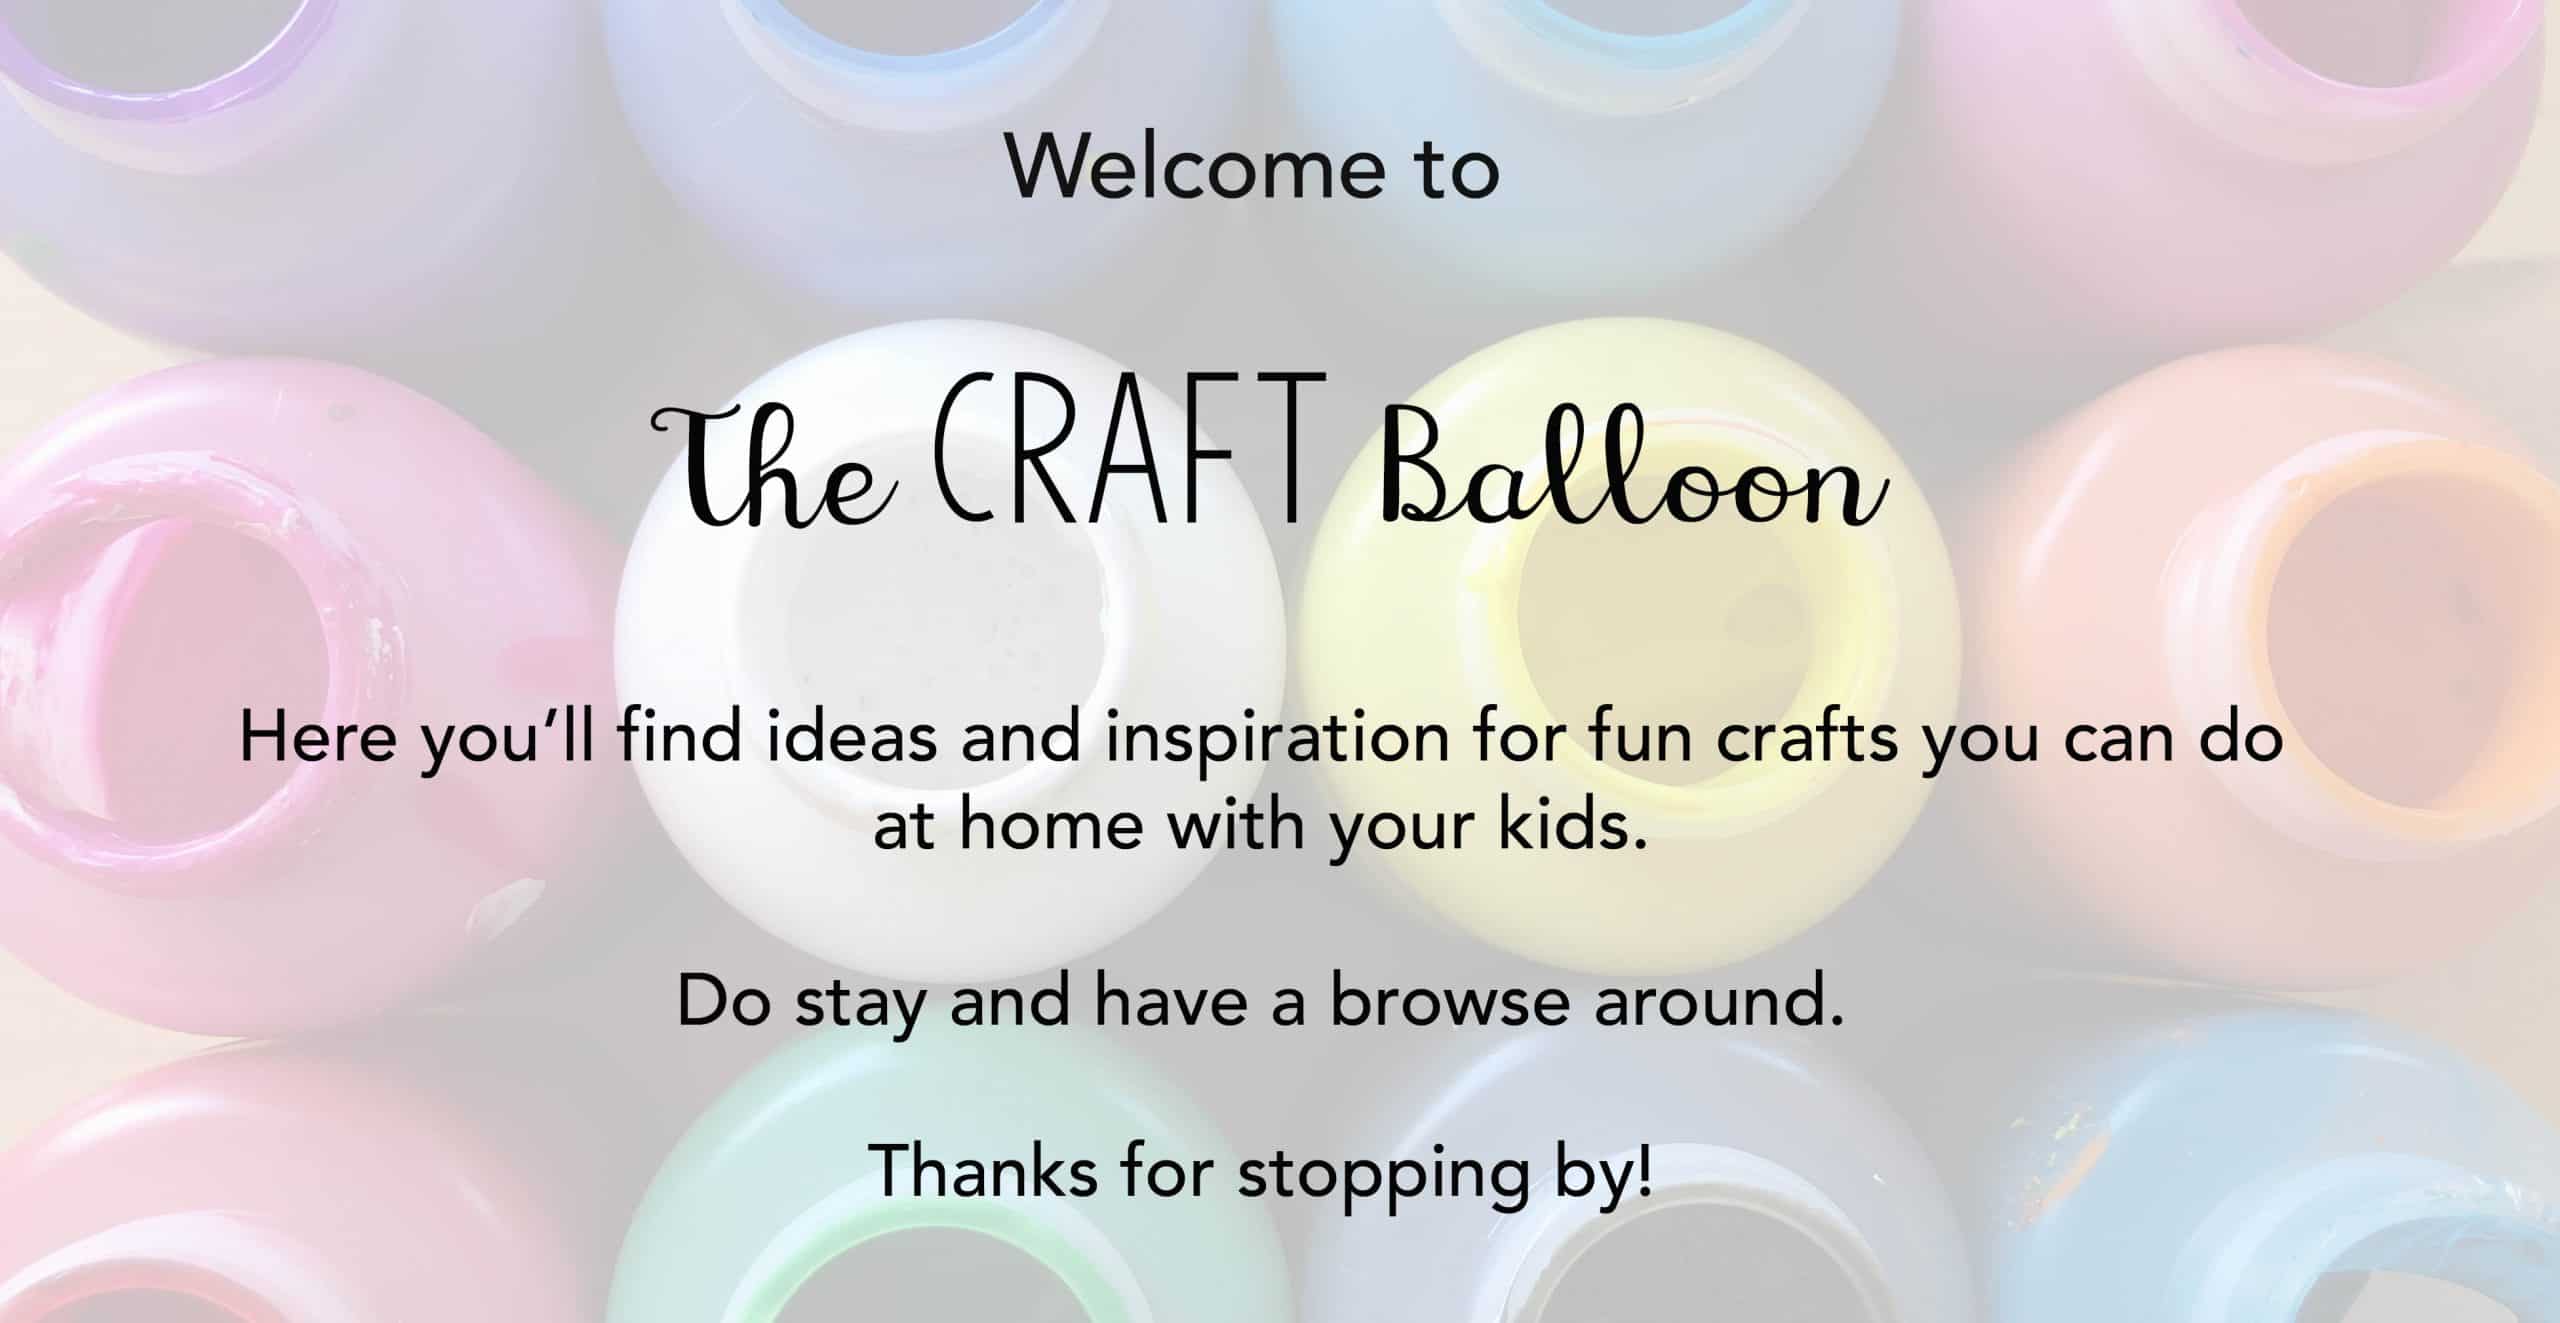 "Welcome to The Craft Balloon. Here you'll find inspiration for fun crafts you can make at home with your kids. Do stay and have a browse around. Thanks for stopping by."